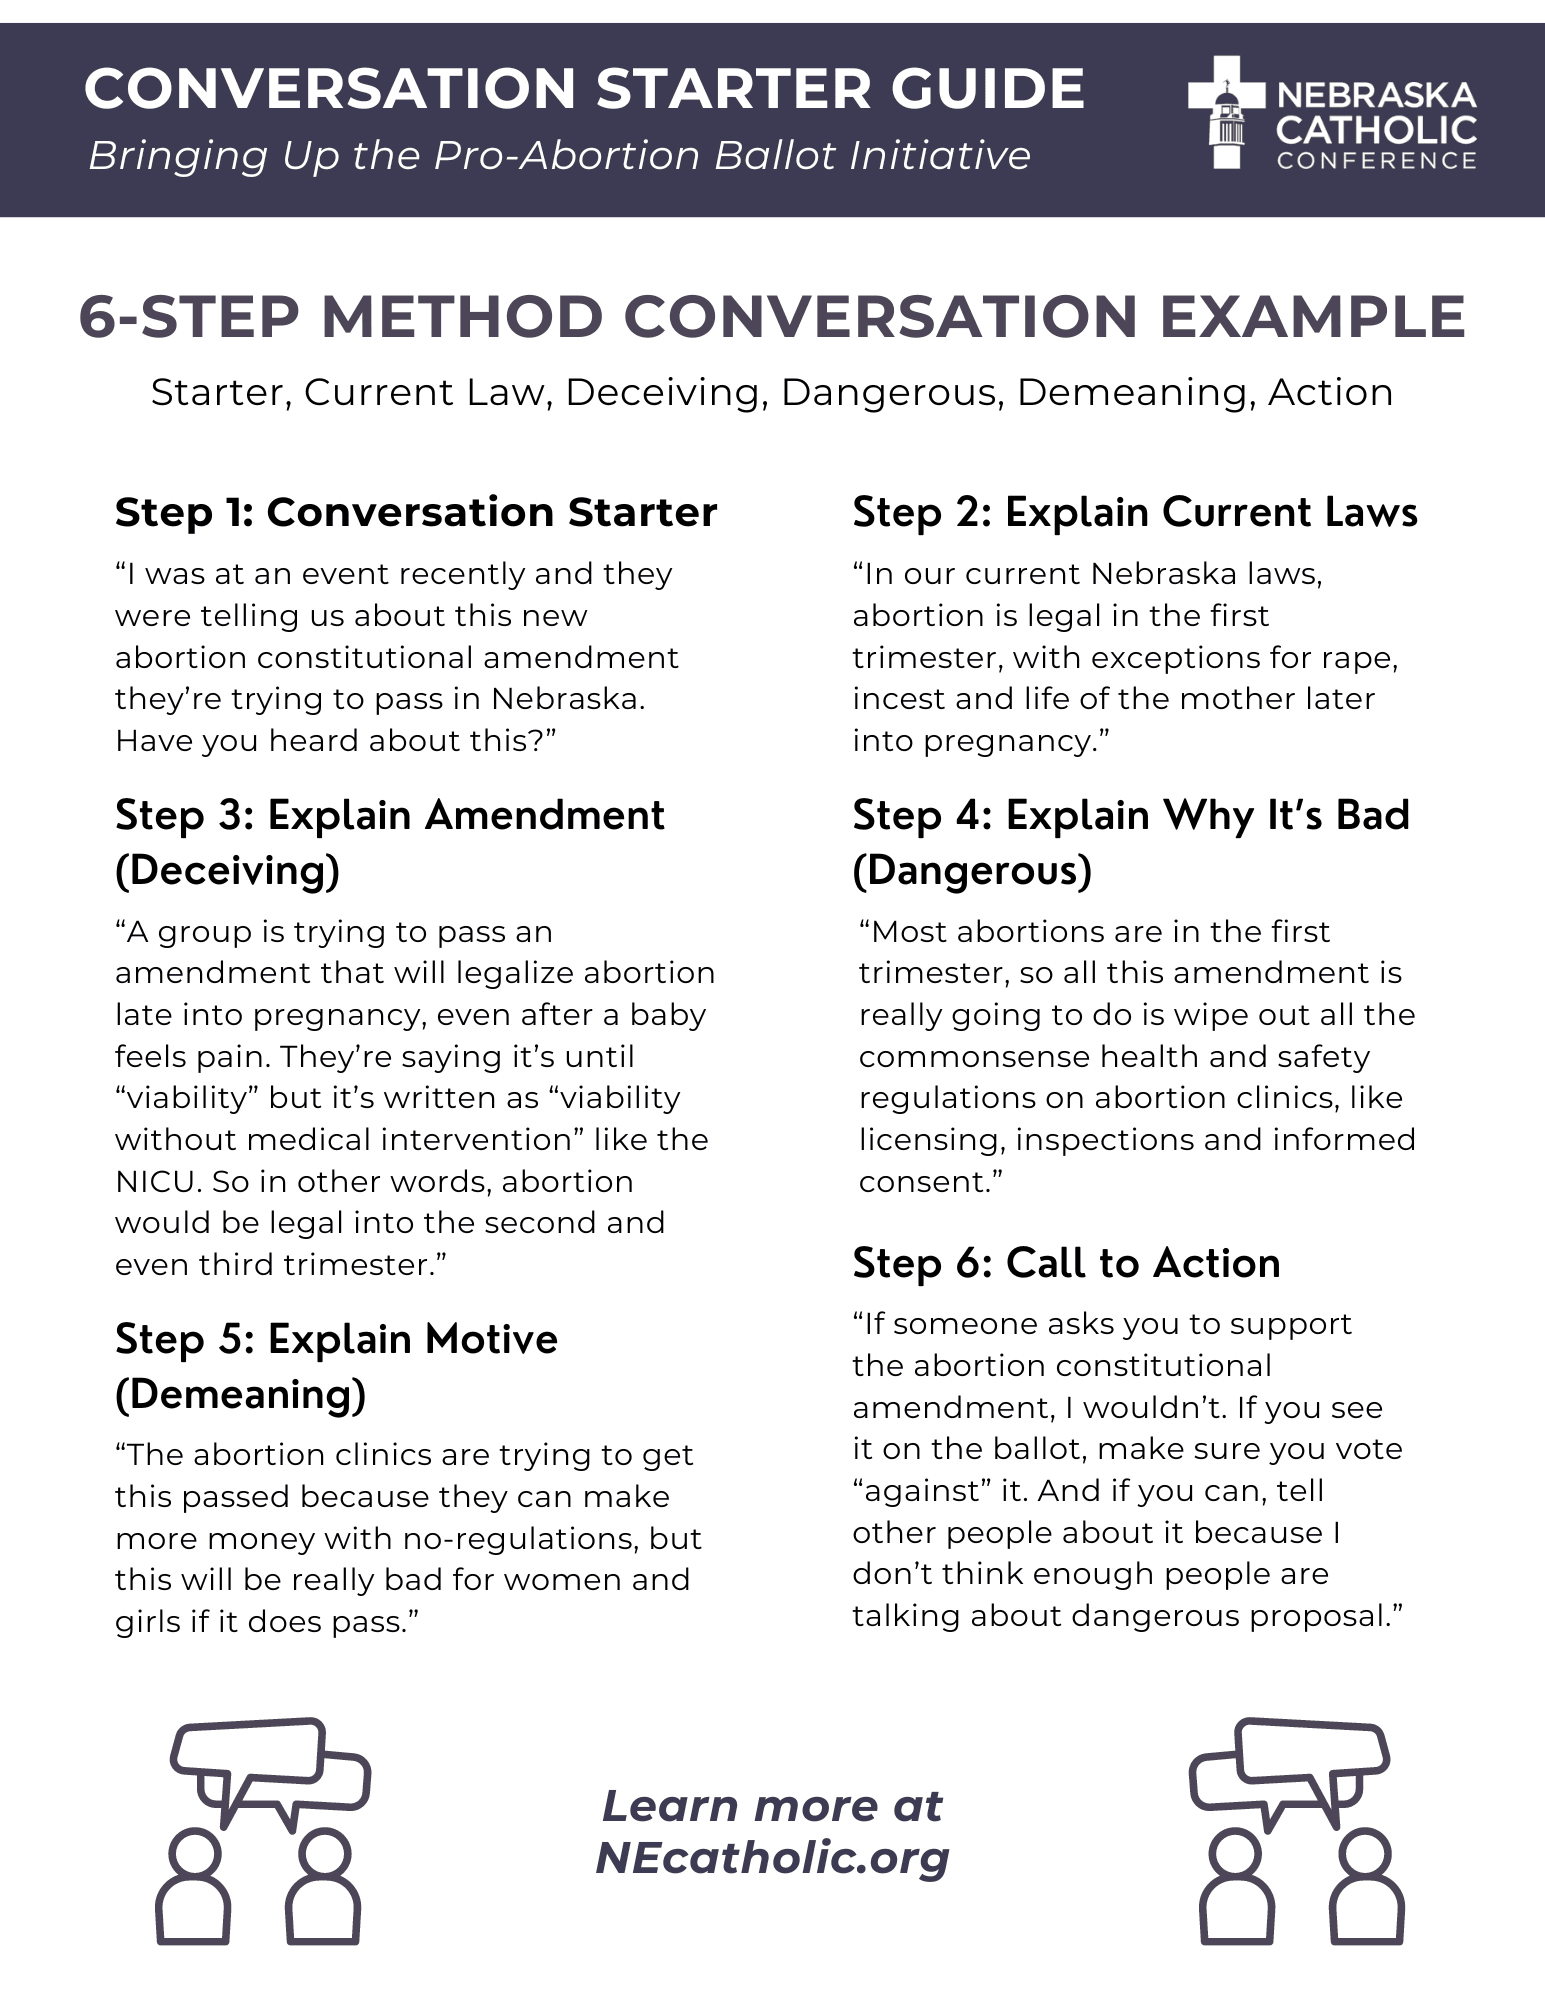 Conversation Starter Guide (One Pager)